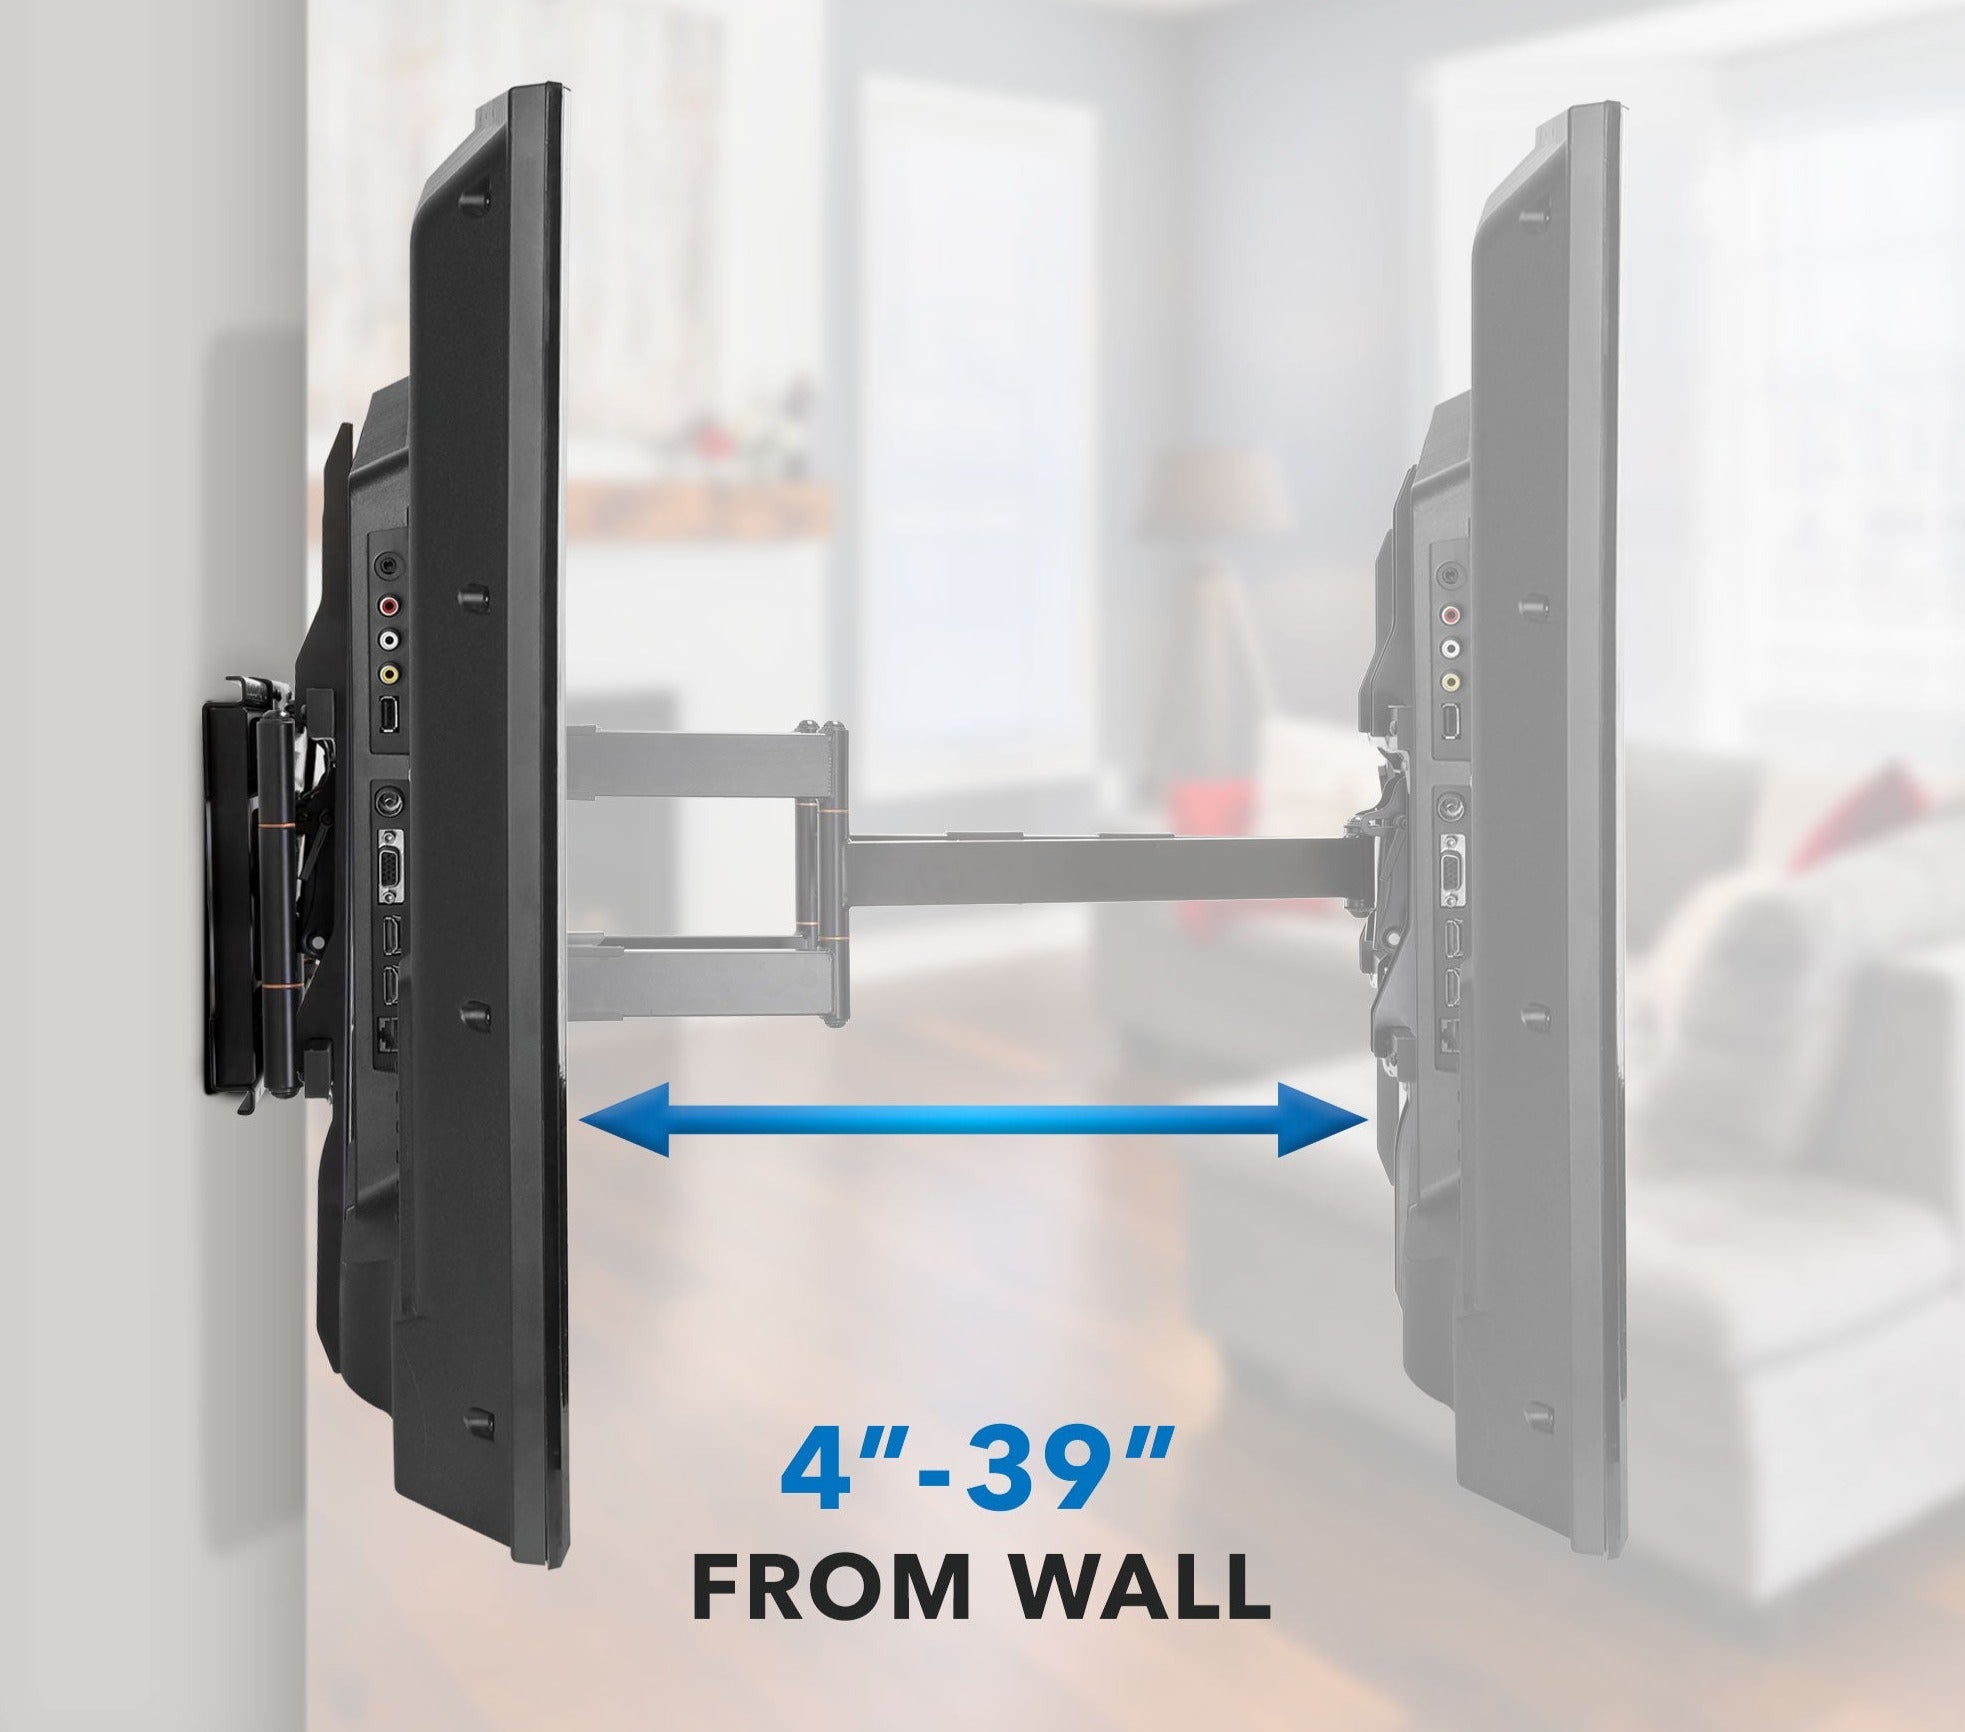 THE BEAST Heavy-Duty Dual-Arm Articulating Wall Mount with Extra-Long Extension